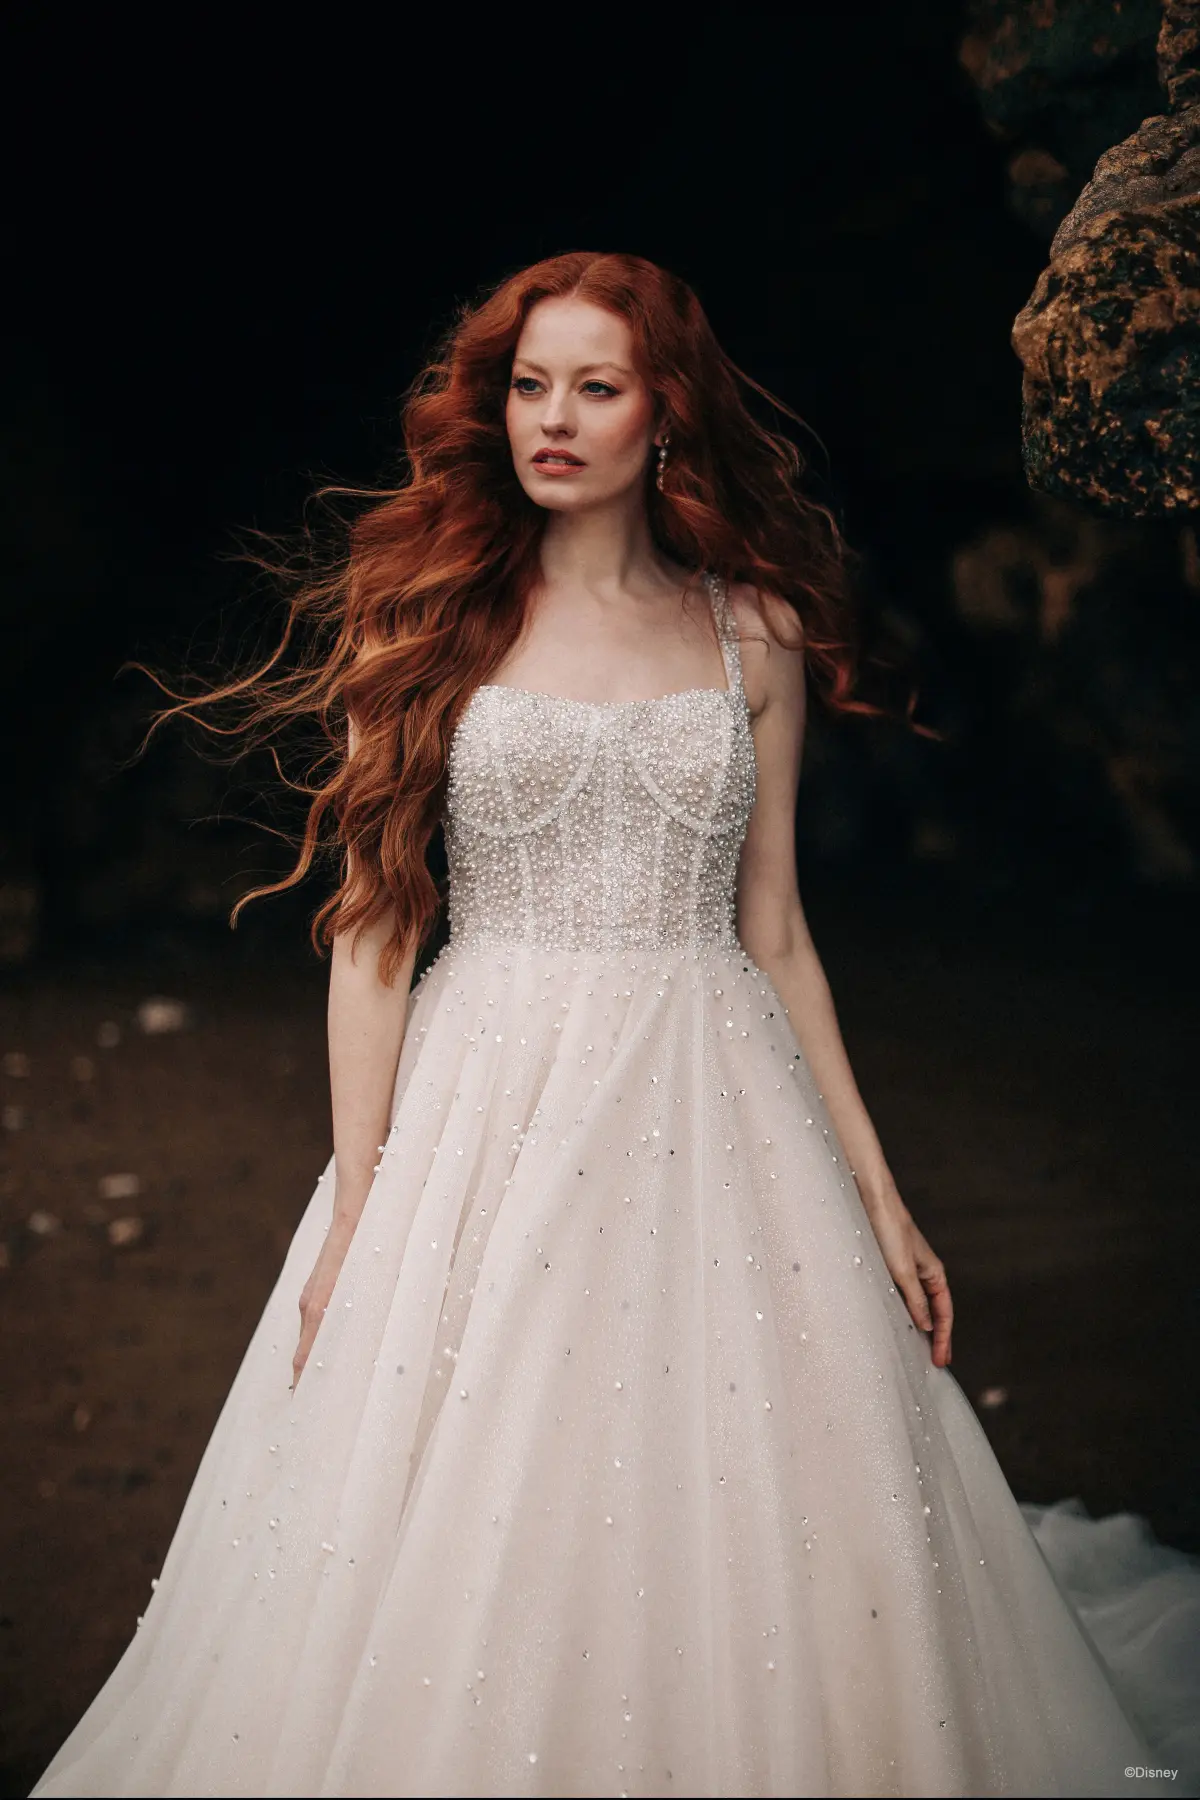 This fairytale #RosaClaraCouture princess wedding dress features a